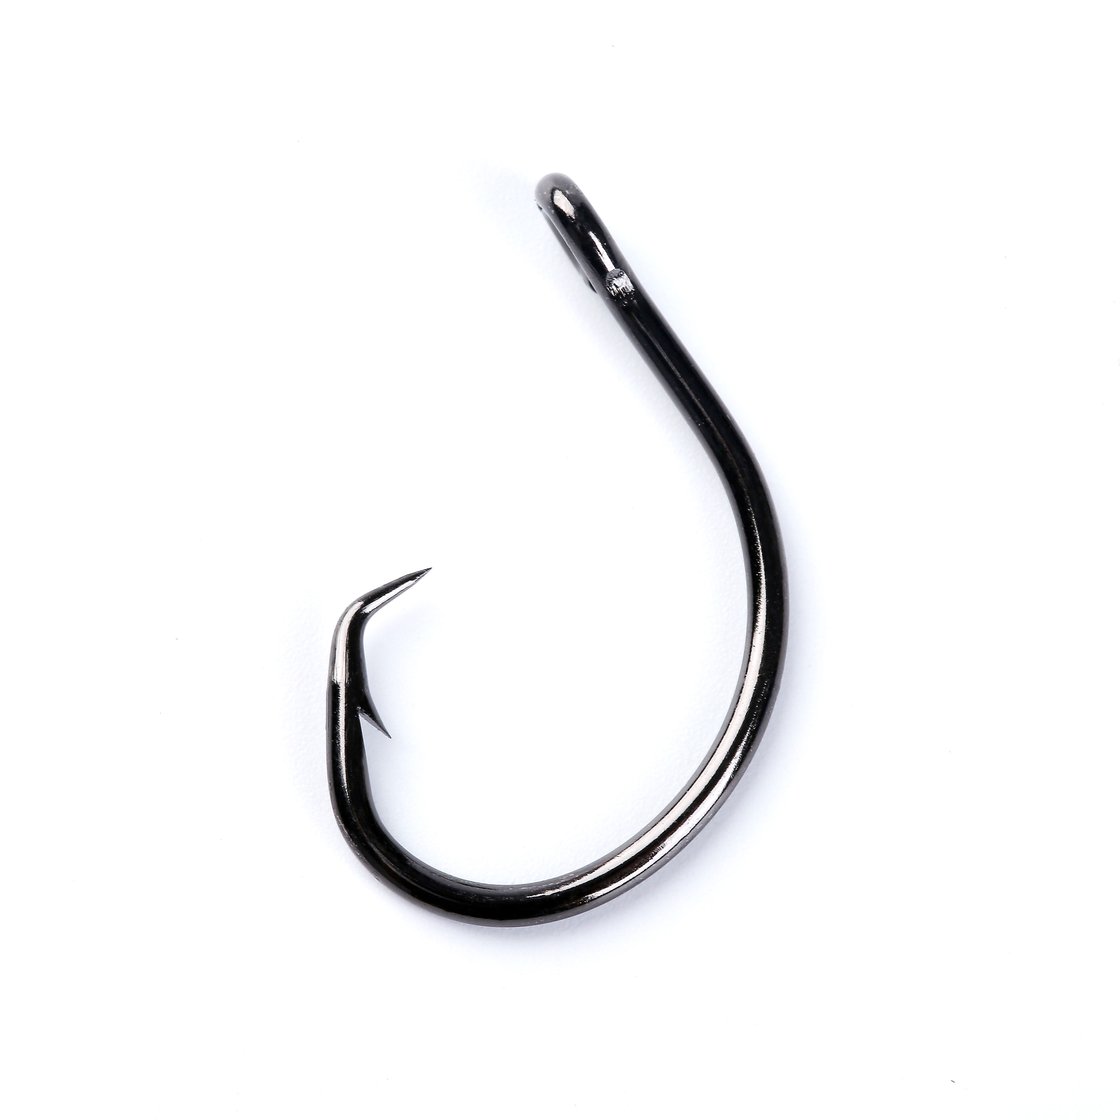 Mustad UltraPoint Demon Wide Gap Perfect in-Line Circle 1 Extra Fine Wire Hook Saltwater or Freshwater Fishing Hooks carp For Catfish Gear and Equipment bluegill to Tuna